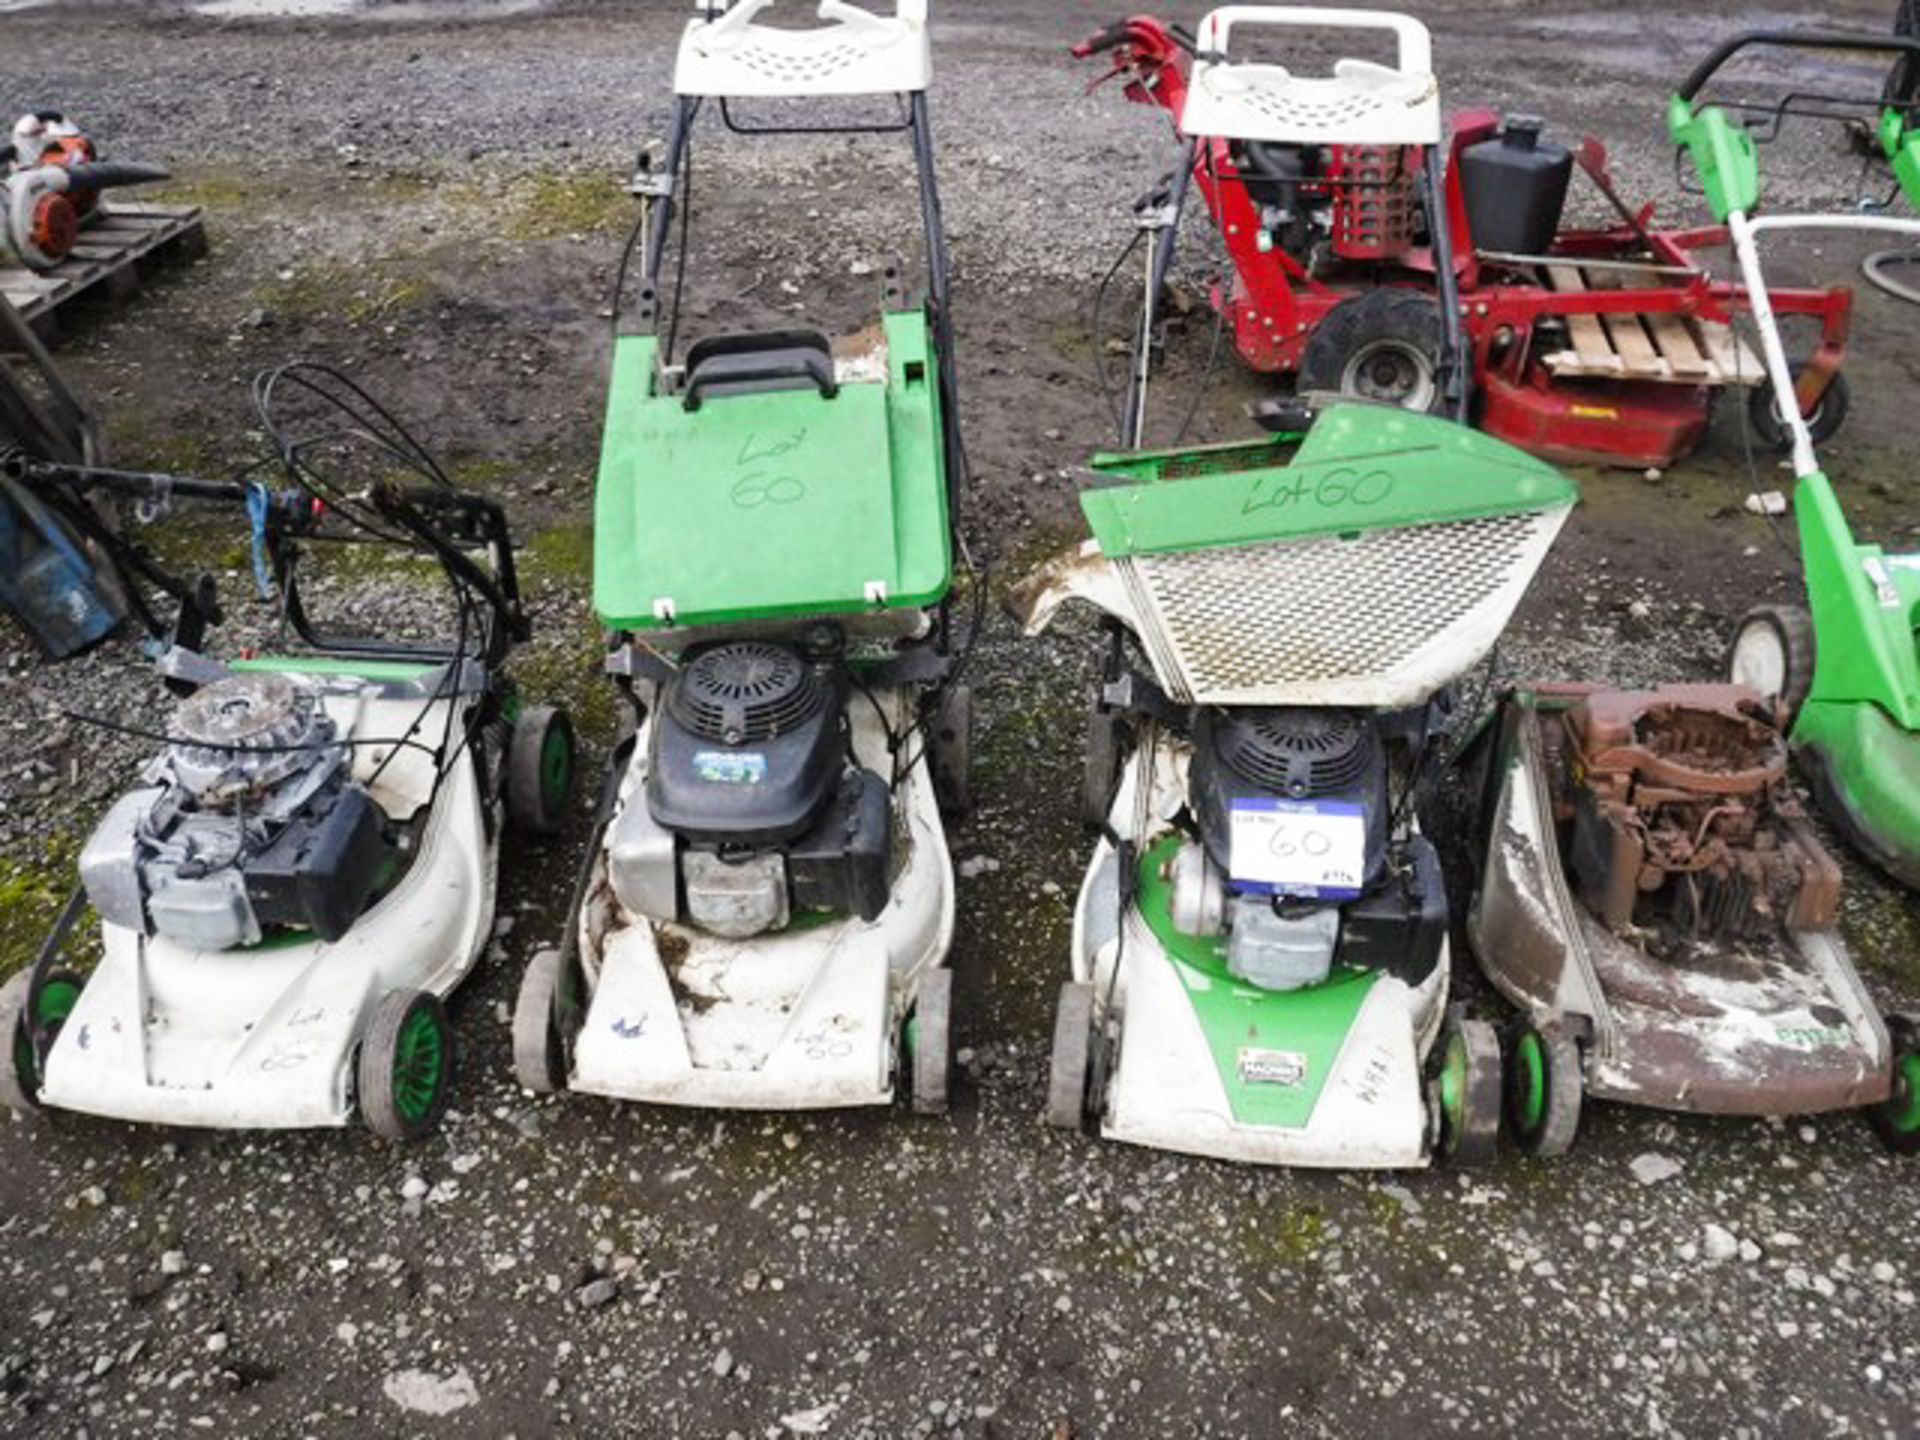 4 X ETESIA PETROL MOWERS, SELF PROPELLED, 2 BOXES, FOR SPARES OR REPAIRS